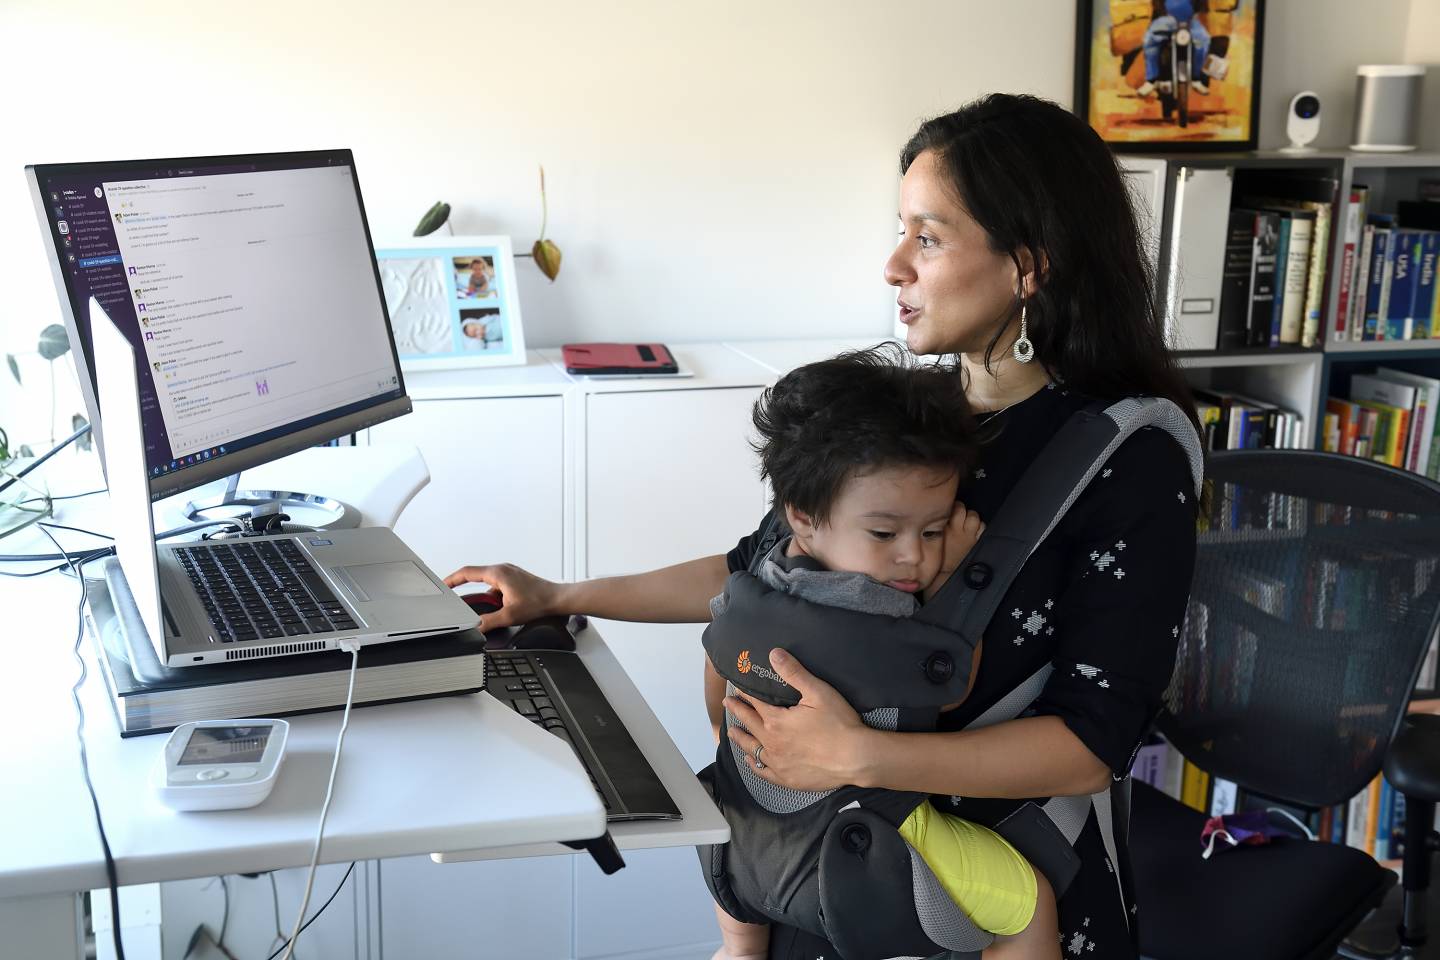 A woman works at a computer with a baby in a carrier strapped to her chest